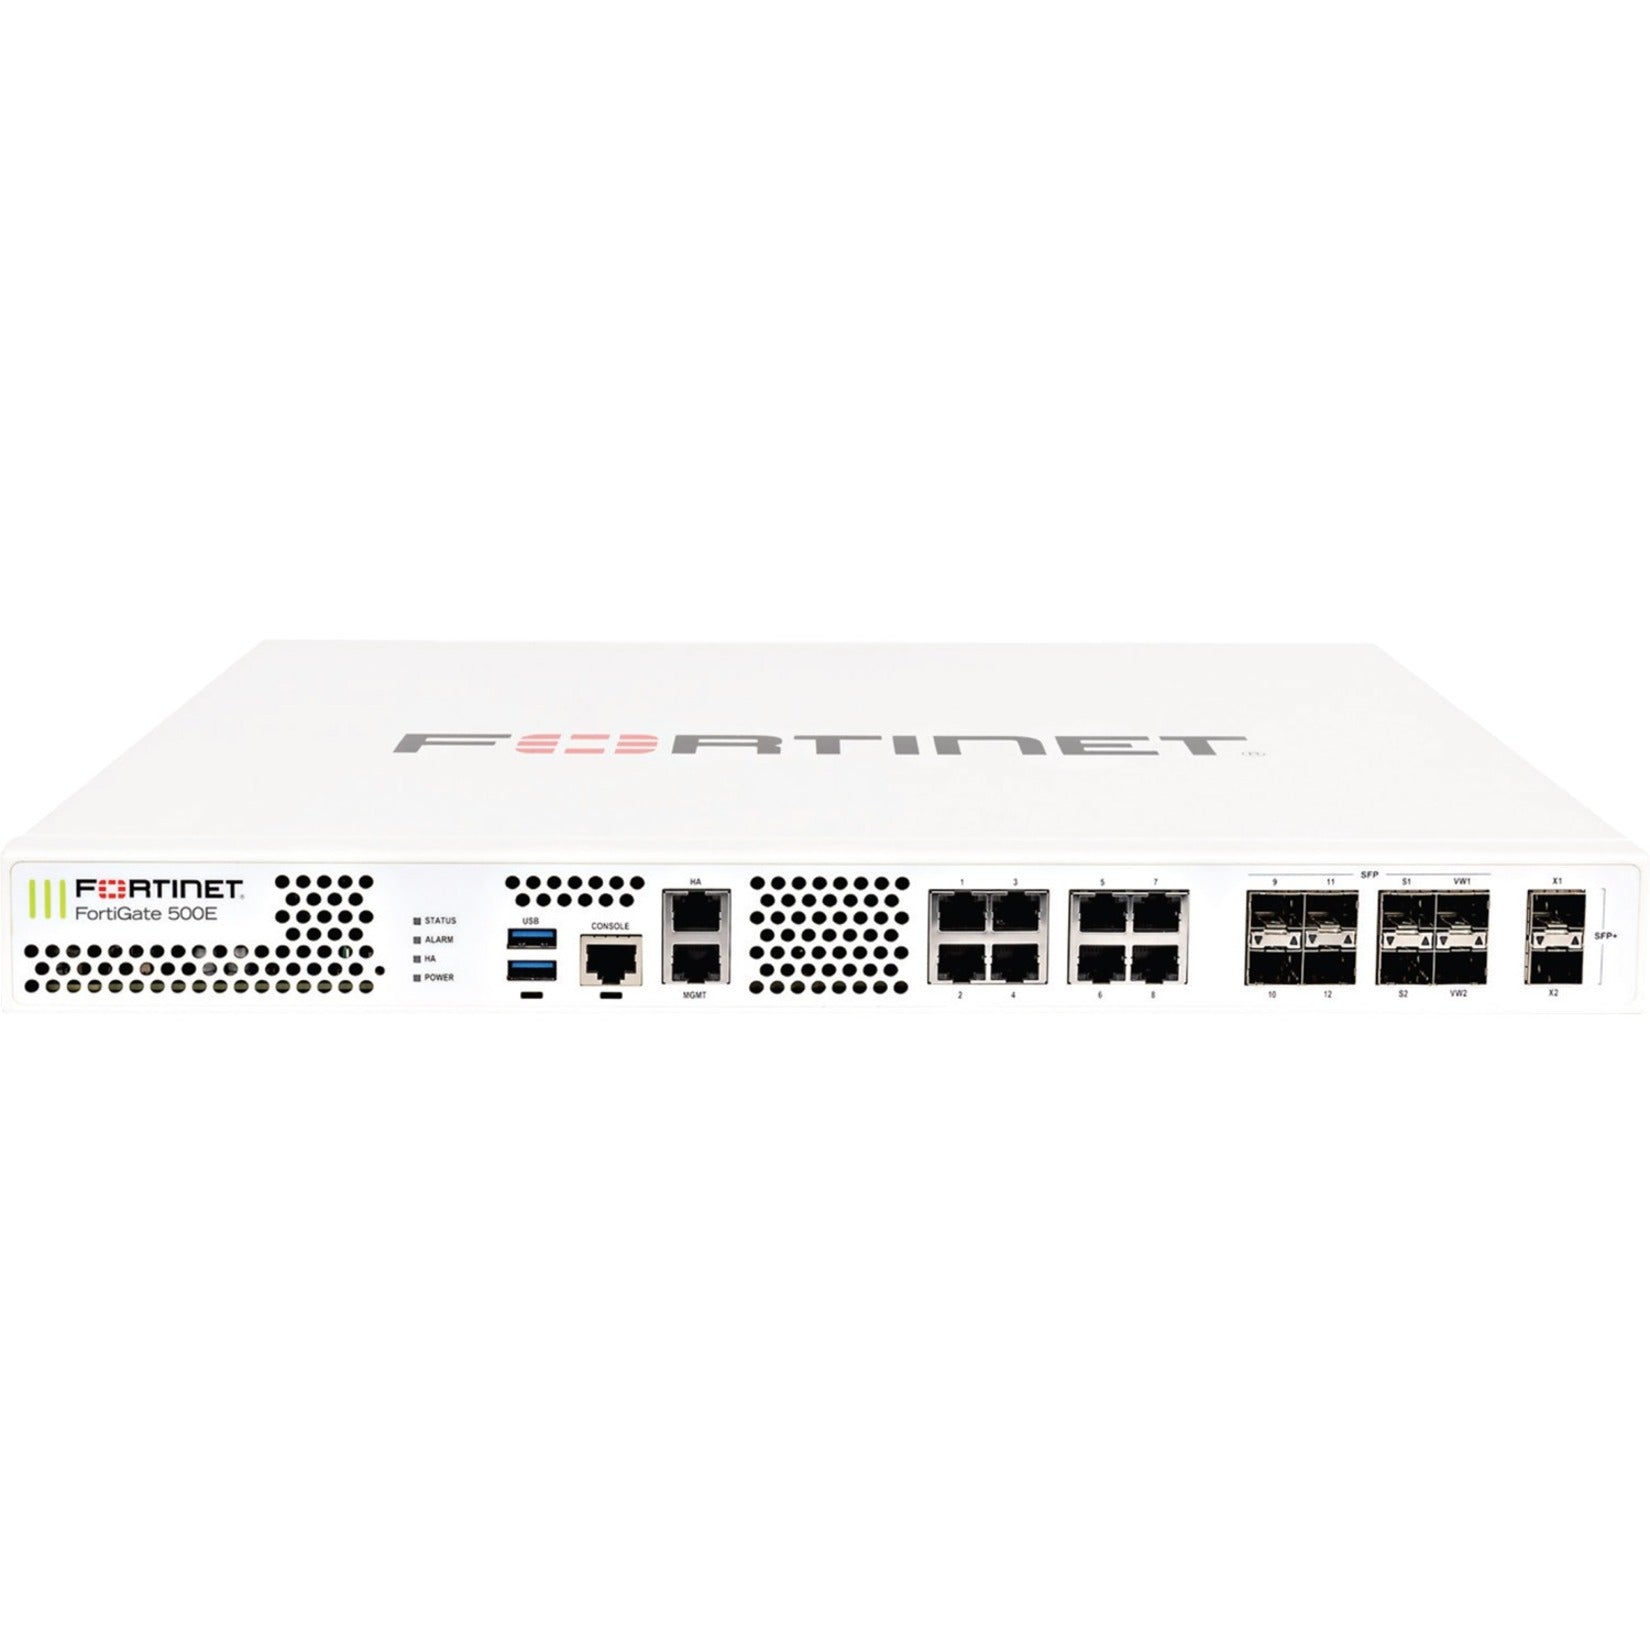 Fortinet FG-500E FortiGate 500E Network Security/Firewall Appliance, Threat Protection, VPN Connectivity